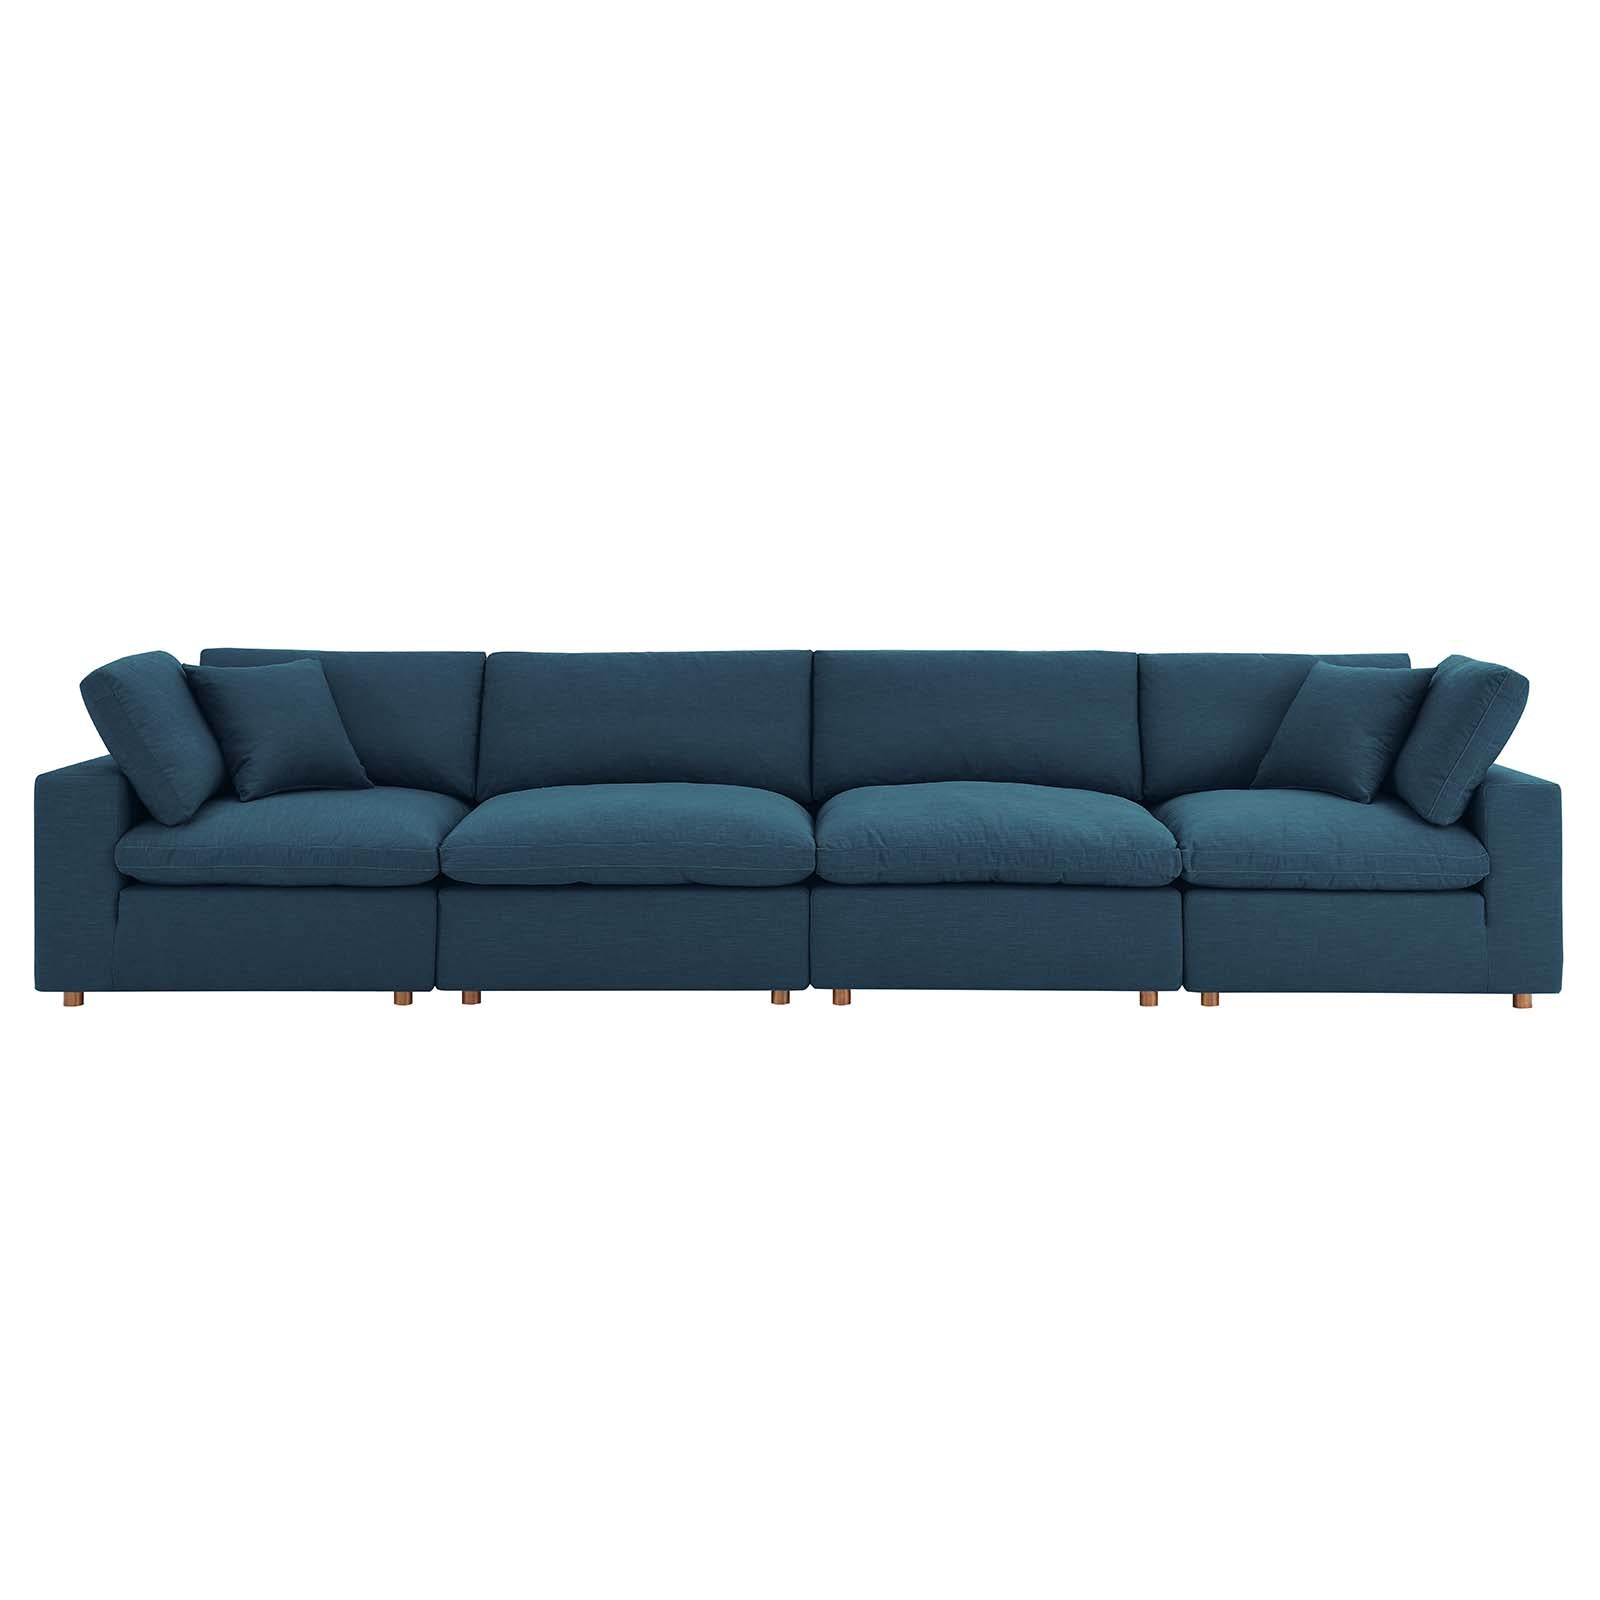 Modway Sectional Sofas - Commix Down Filled Overstuffed 4 Piece Sectional Sofa Set Azure